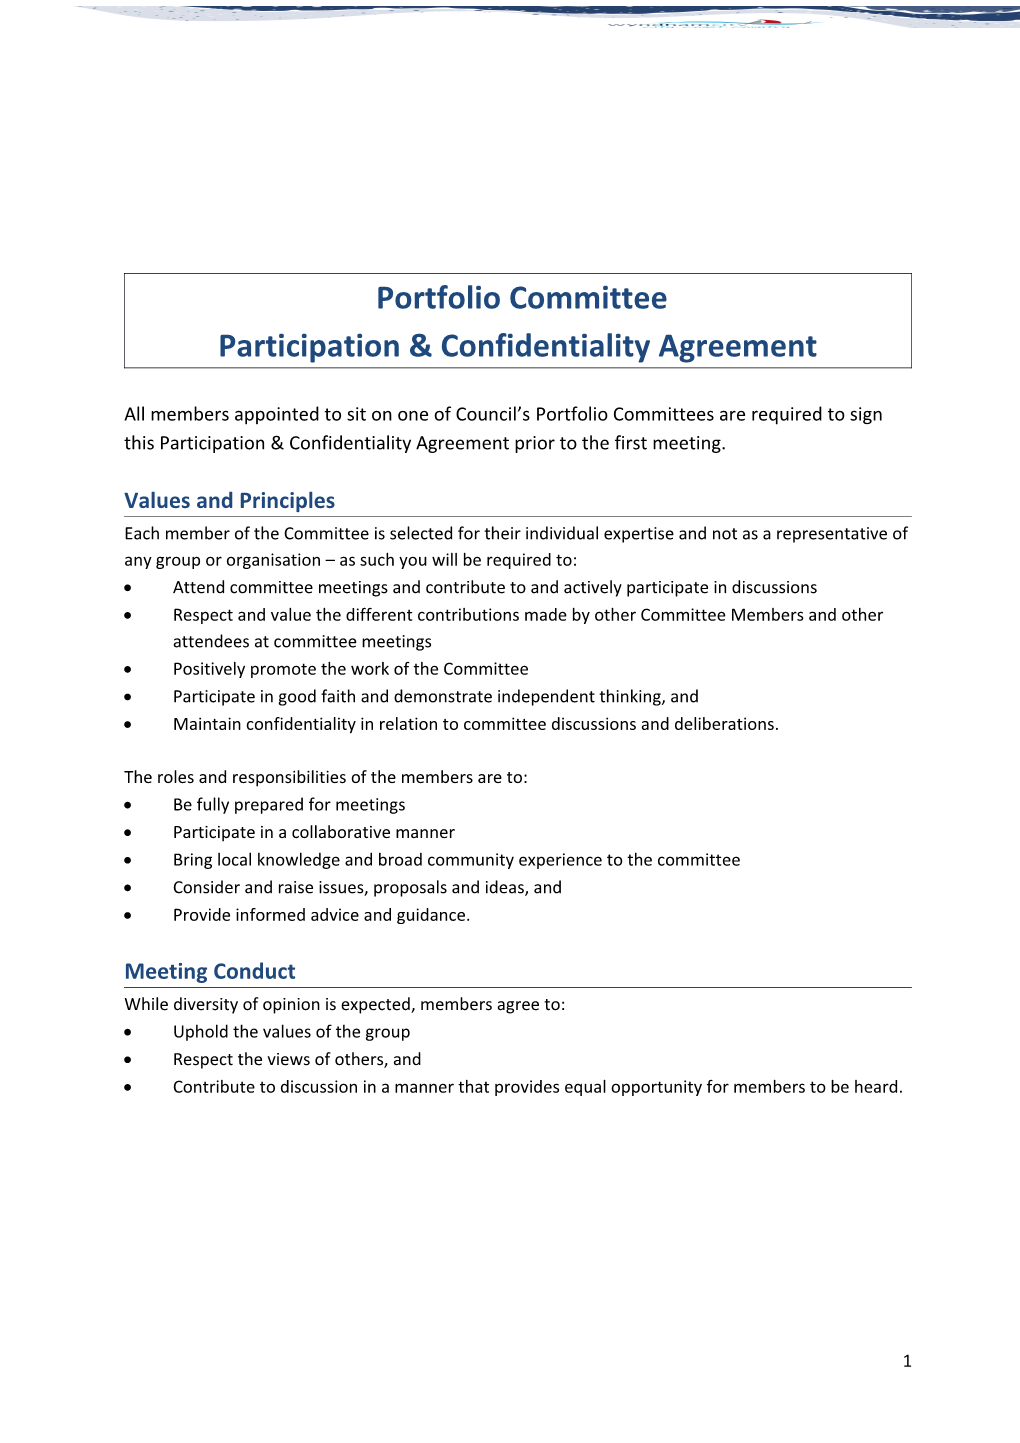 Participation & Confidentiality Agreement